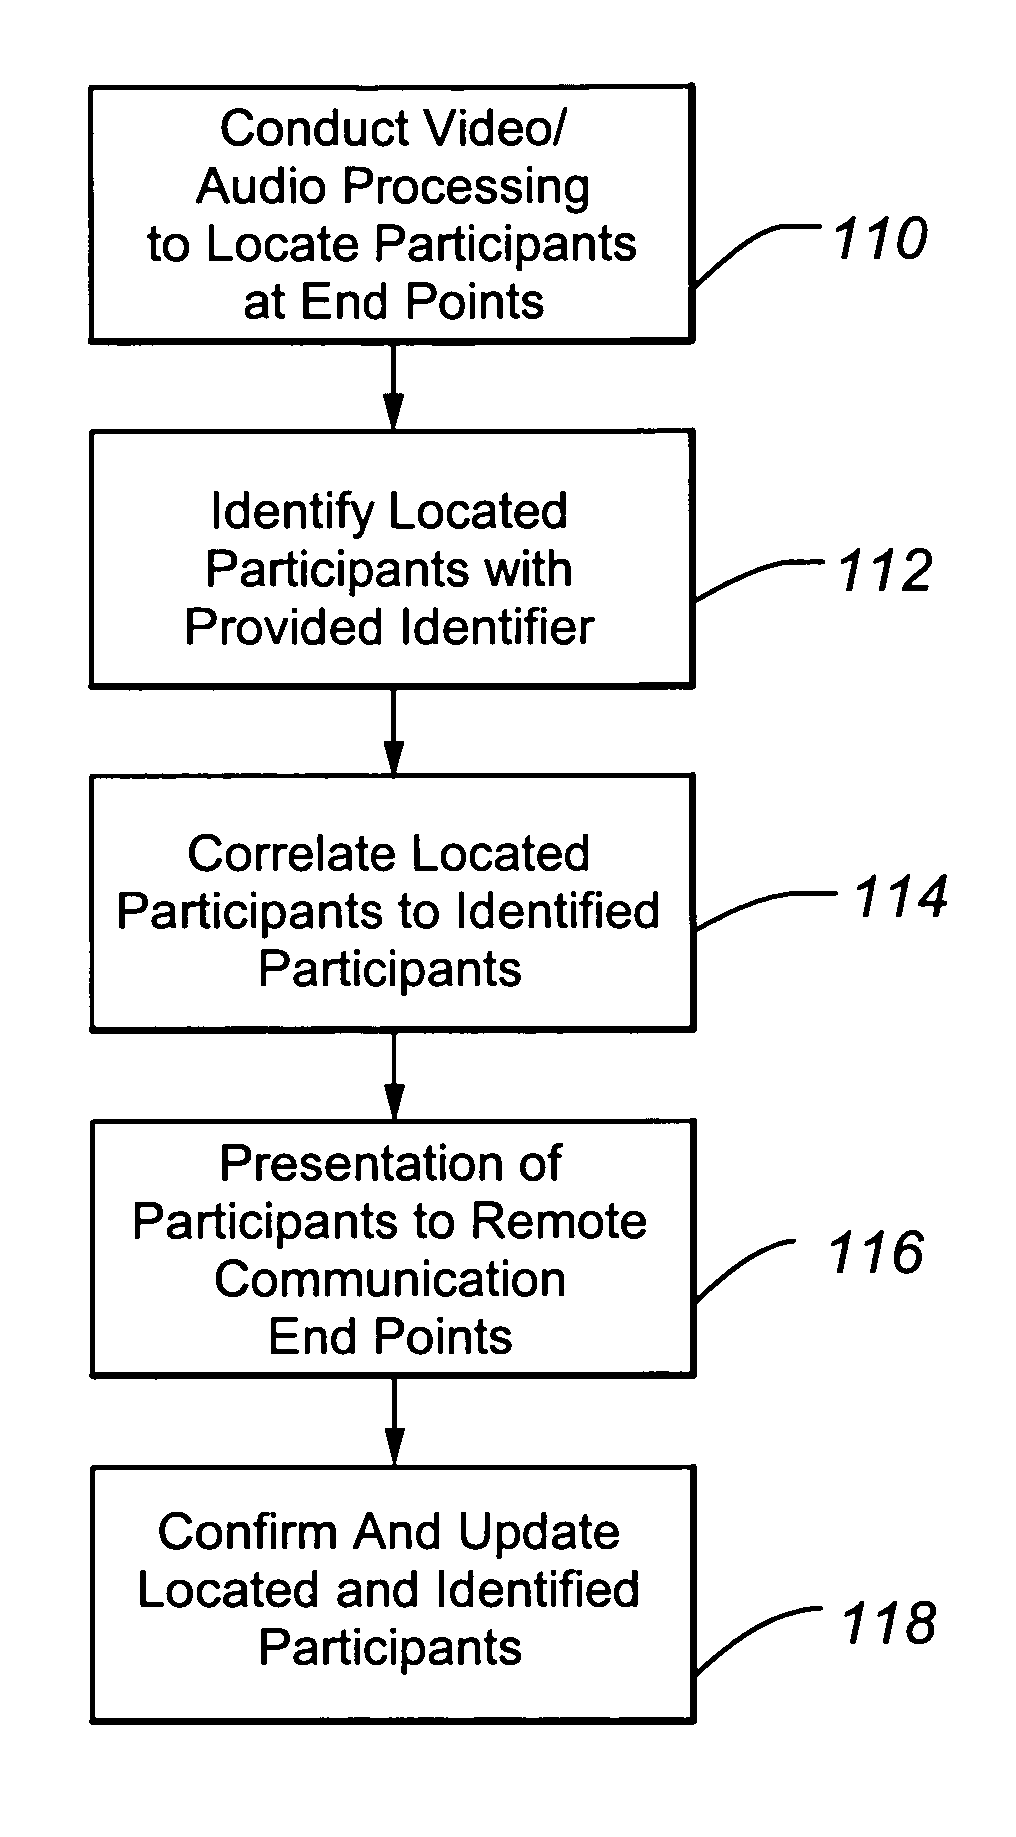 Individual participant identification in shared video resources